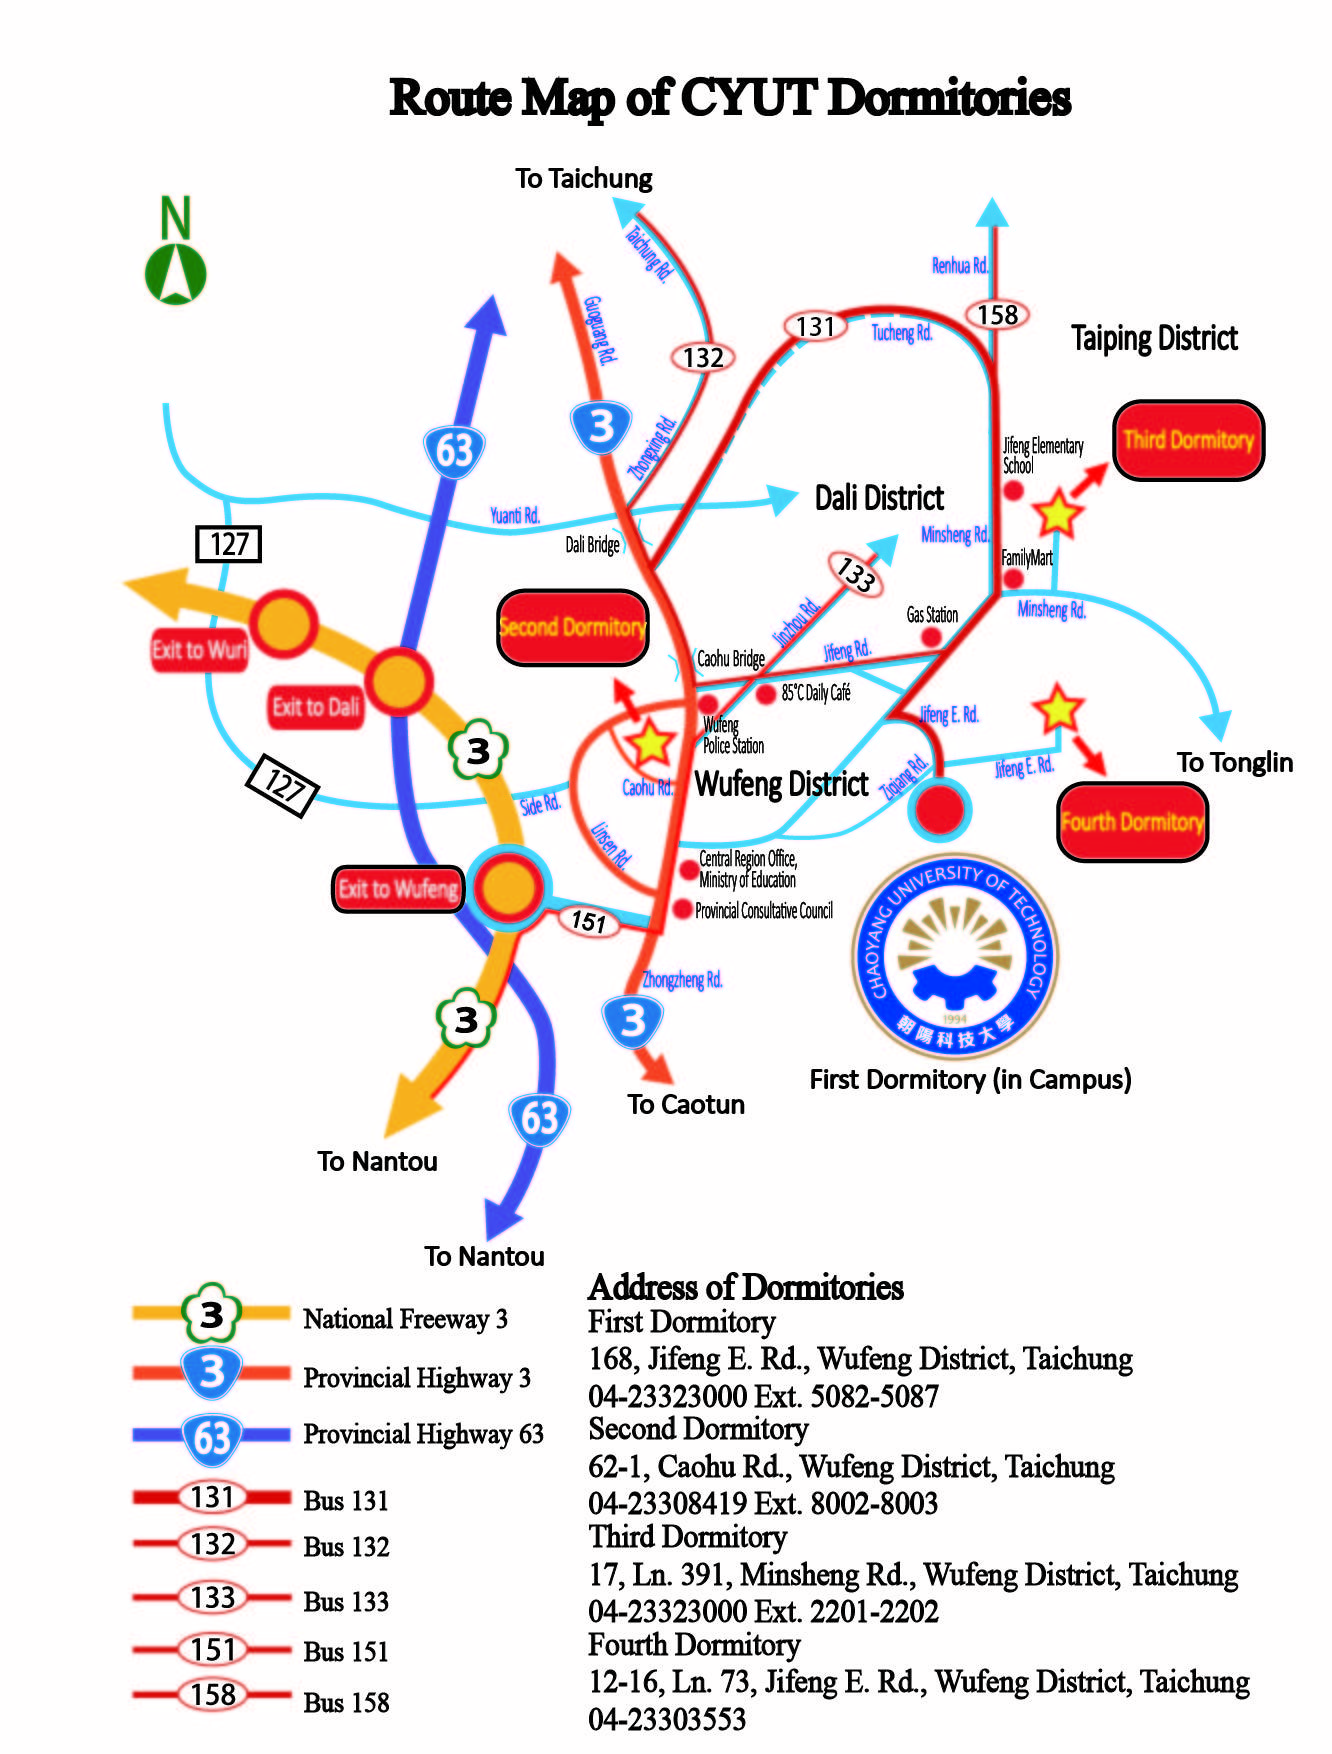 Route Map of CYUT Dormitories